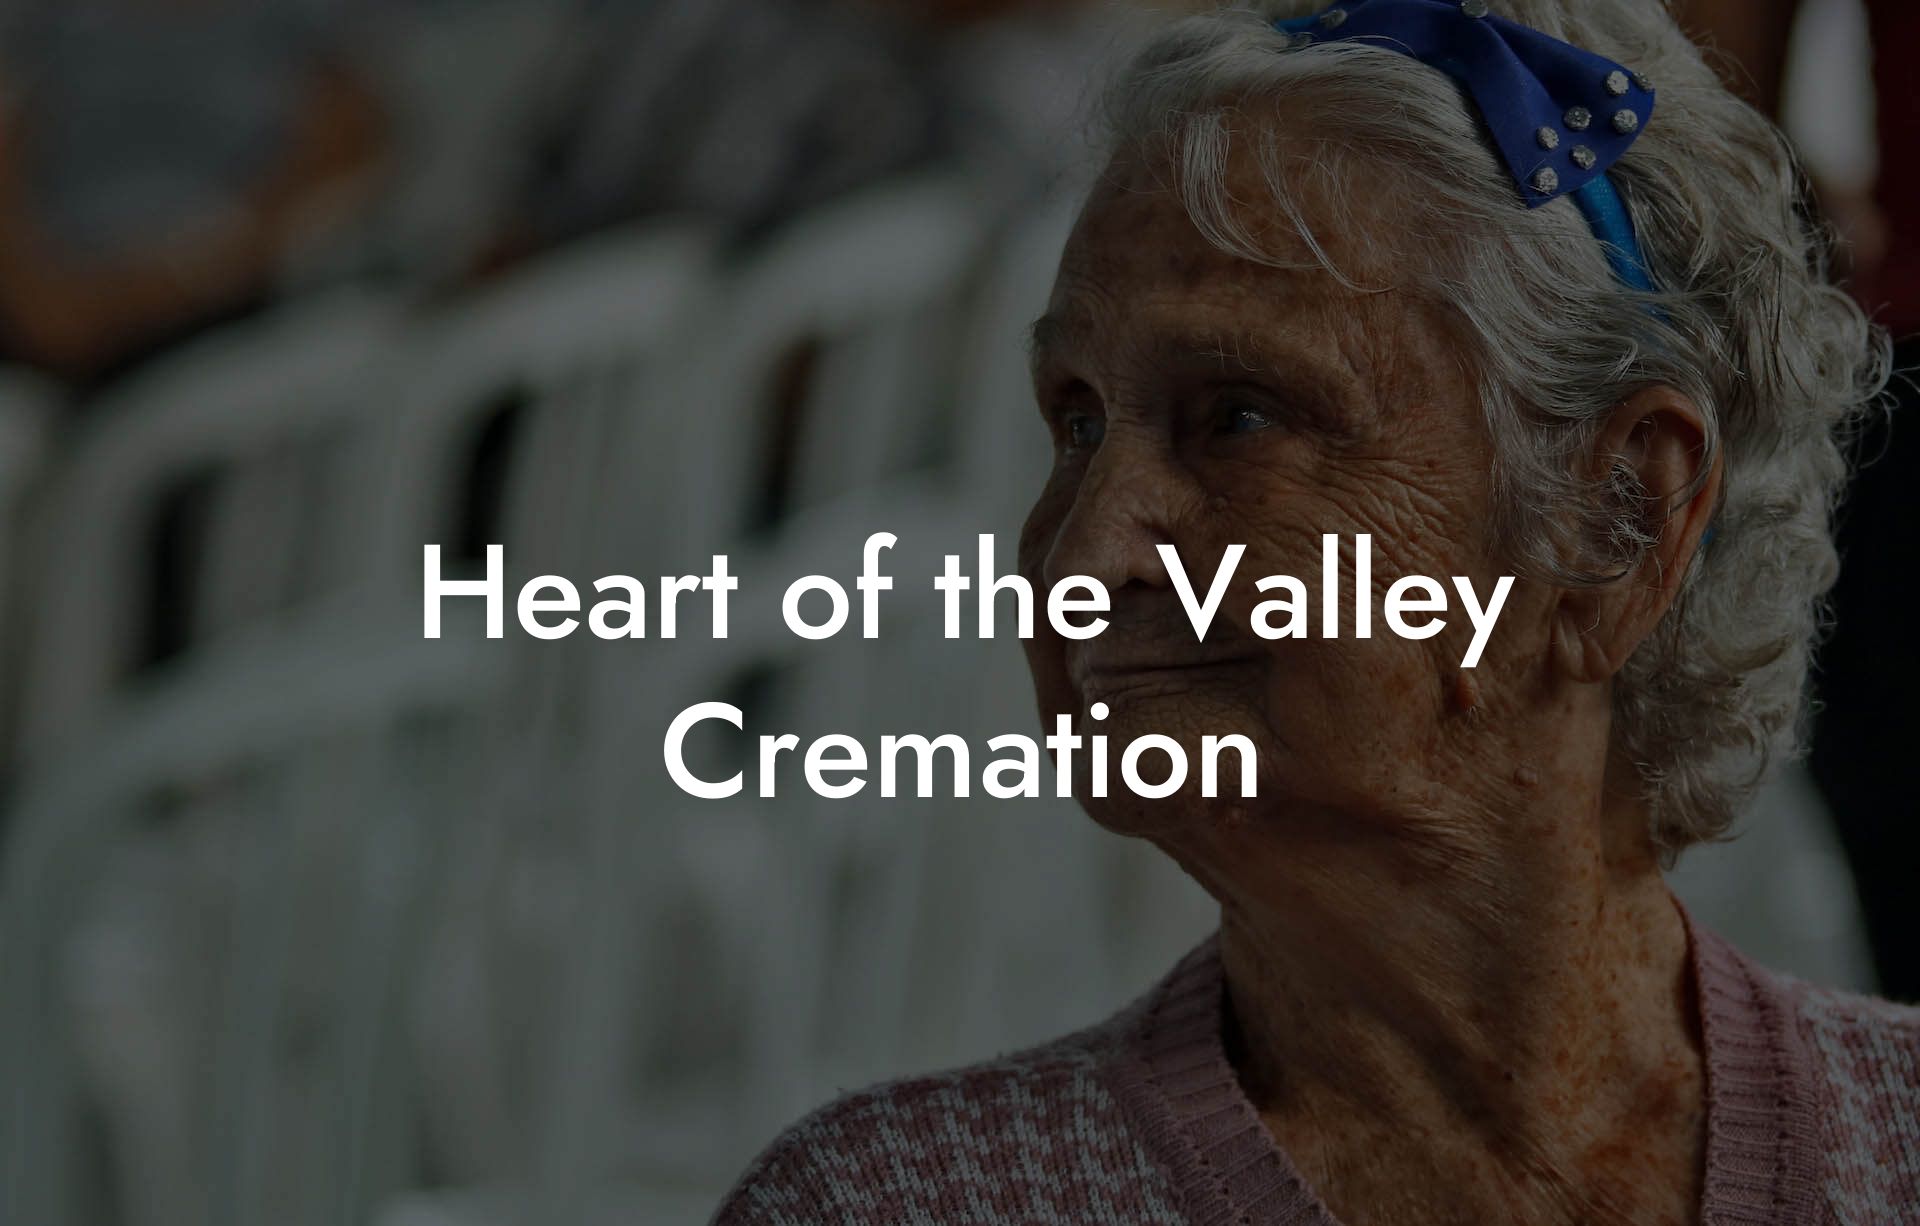 Heart of the Valley Cremation